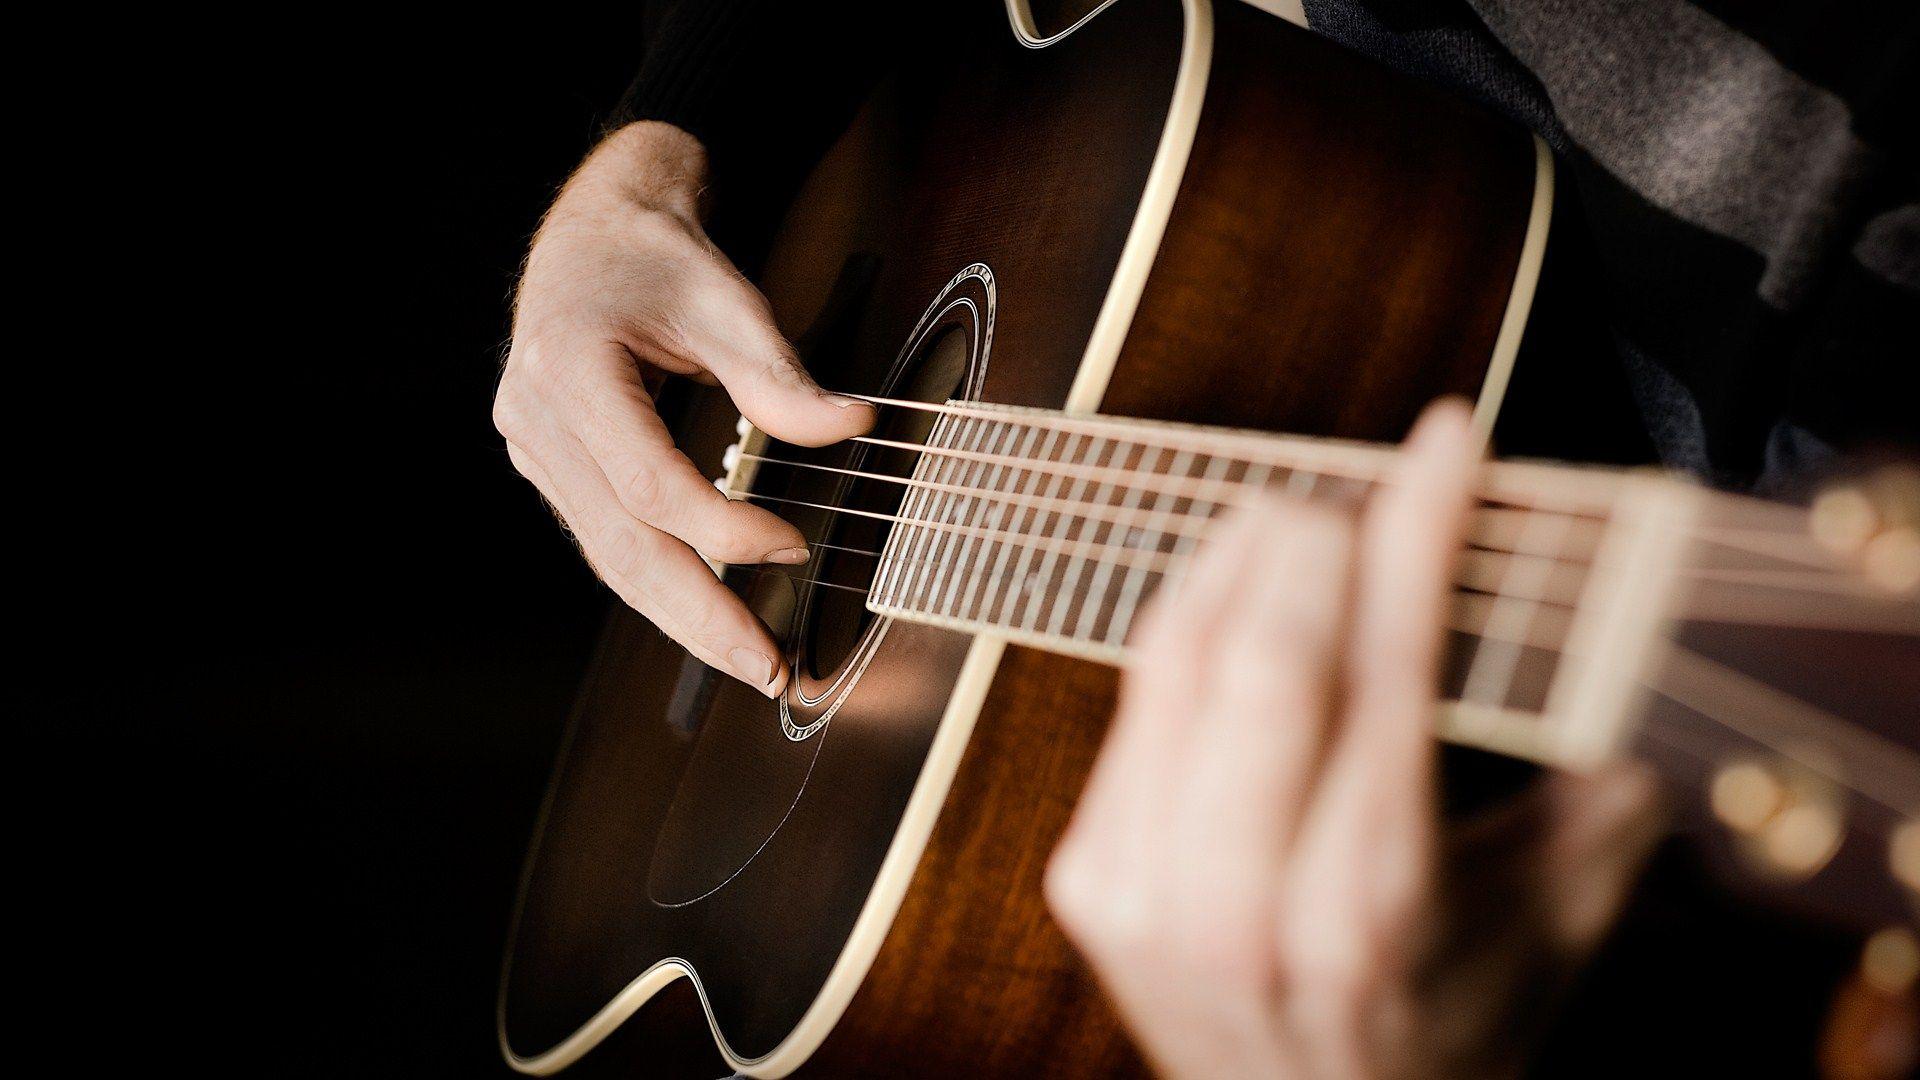 Awesome Acoustic Guitar HD Wallpaper Free Download